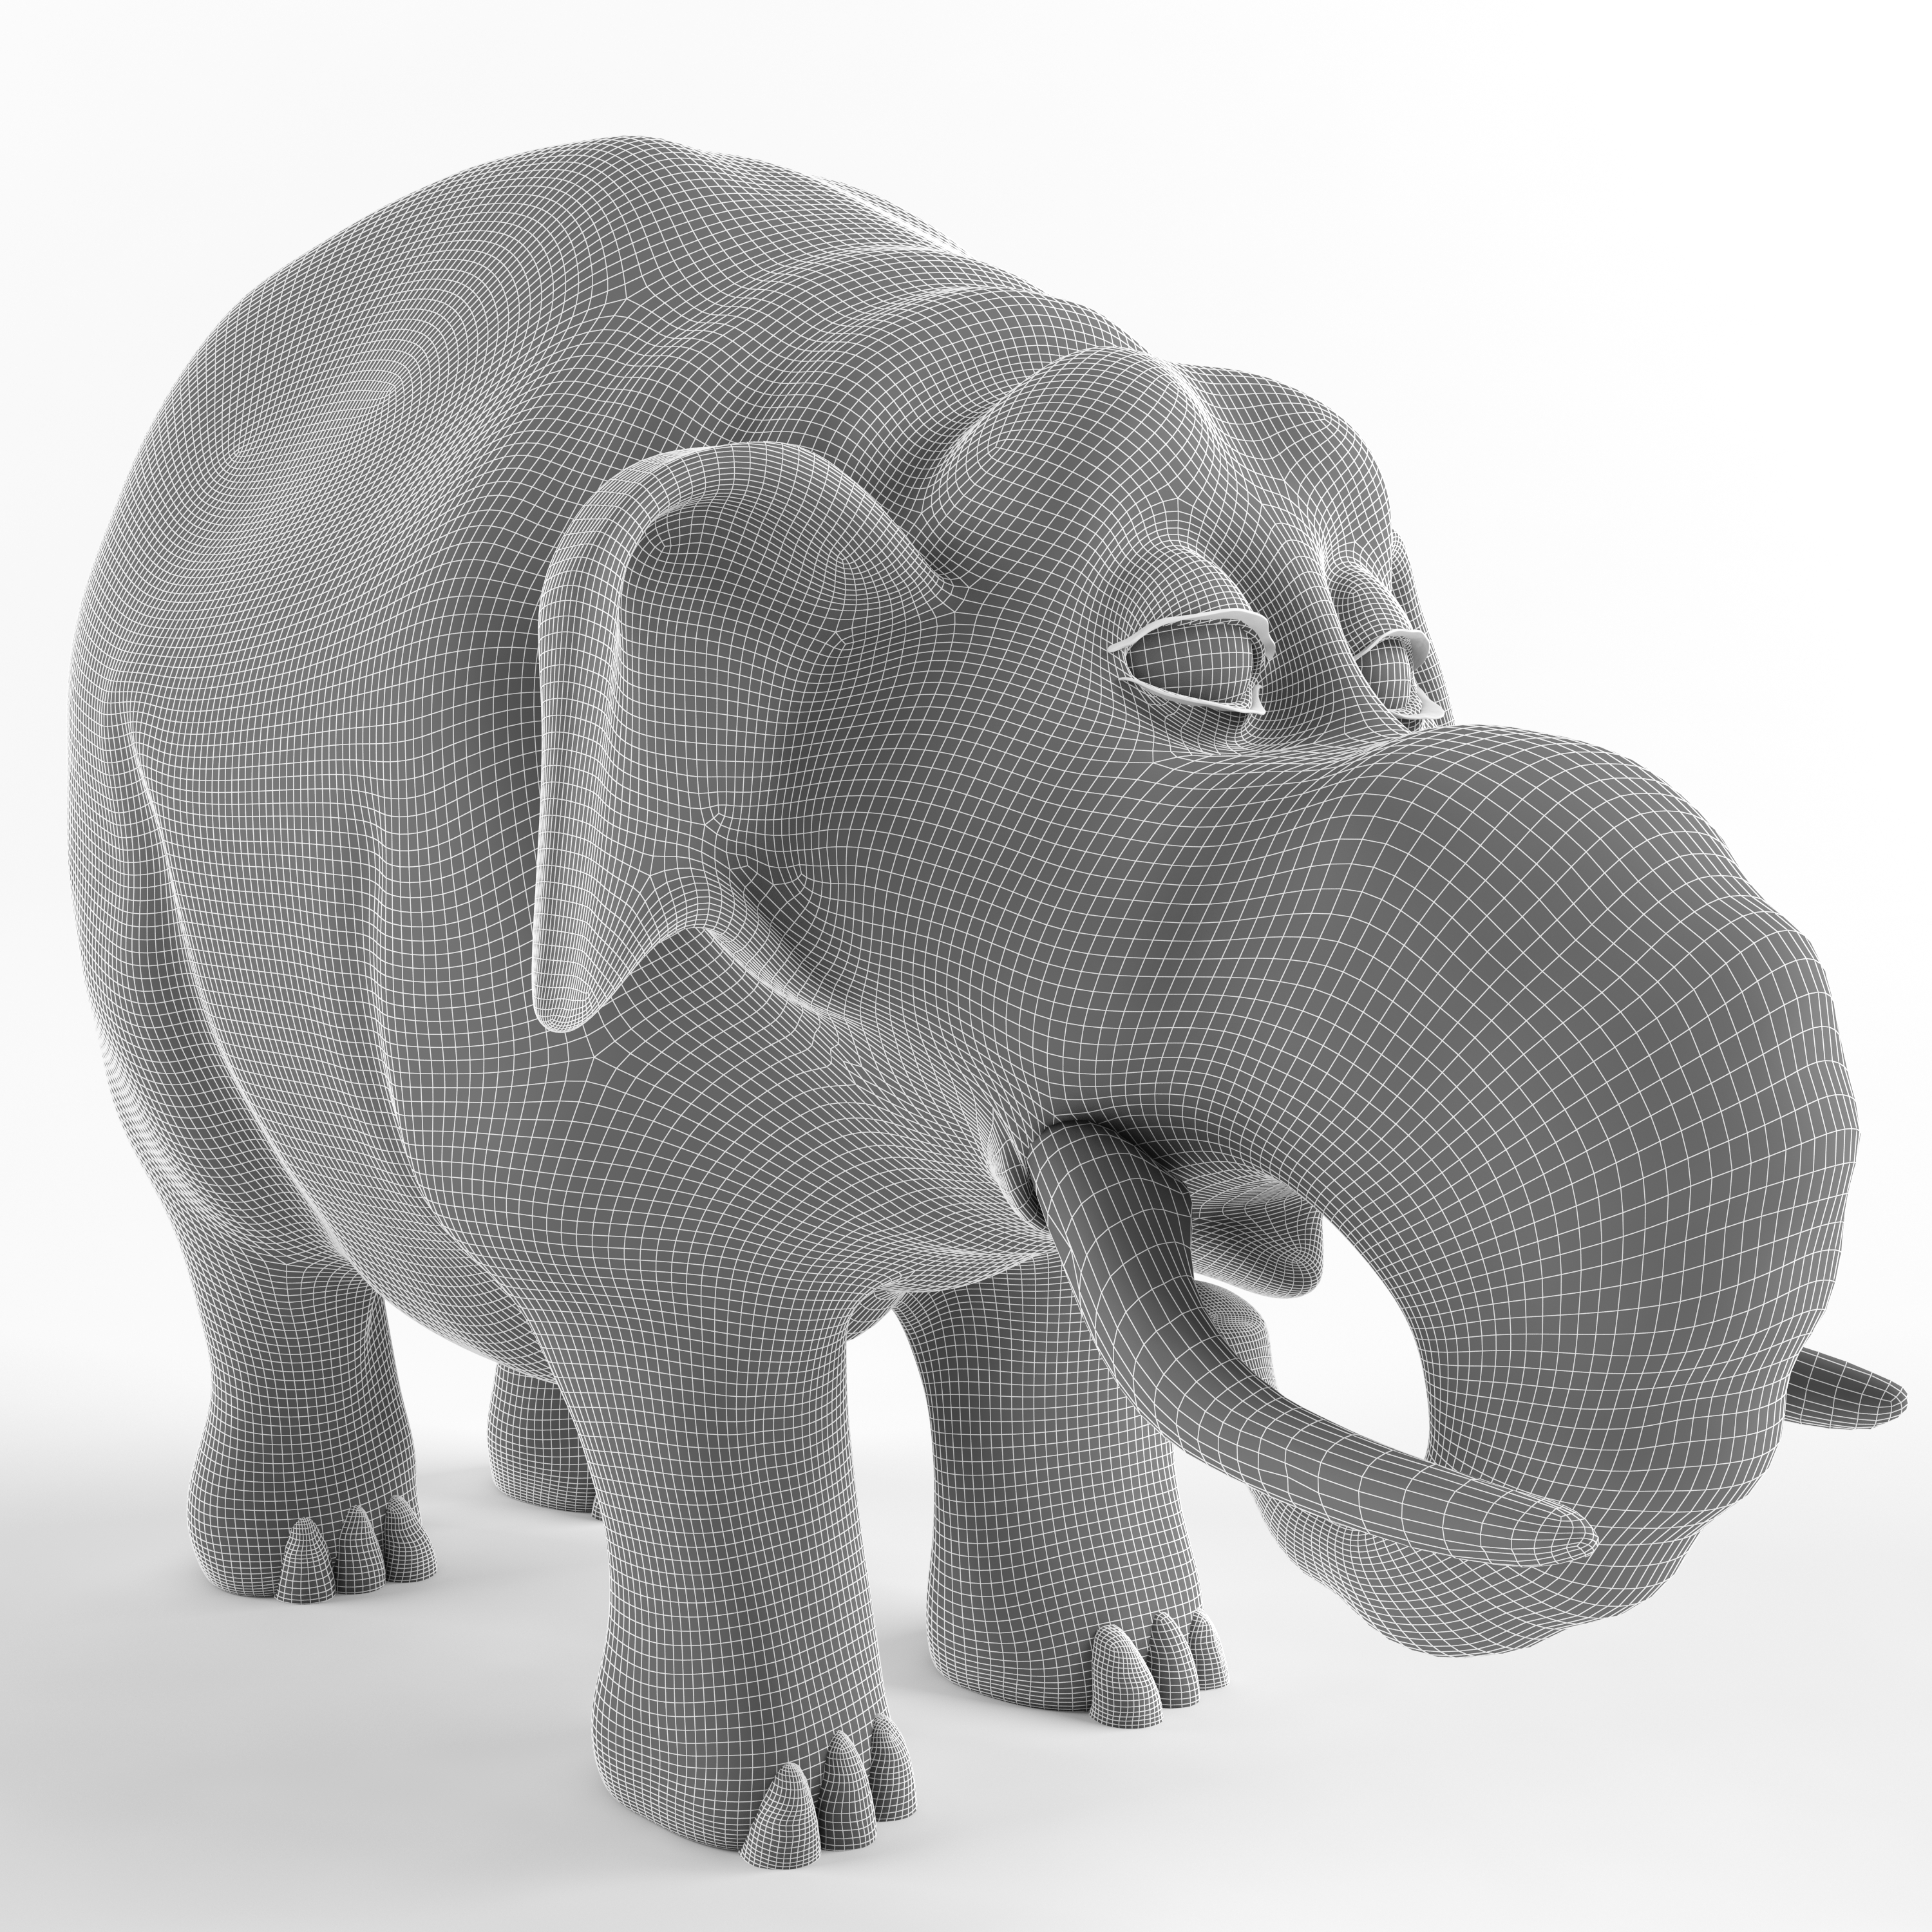 Childrens plastic toy Elephant by T1989 3DOcean